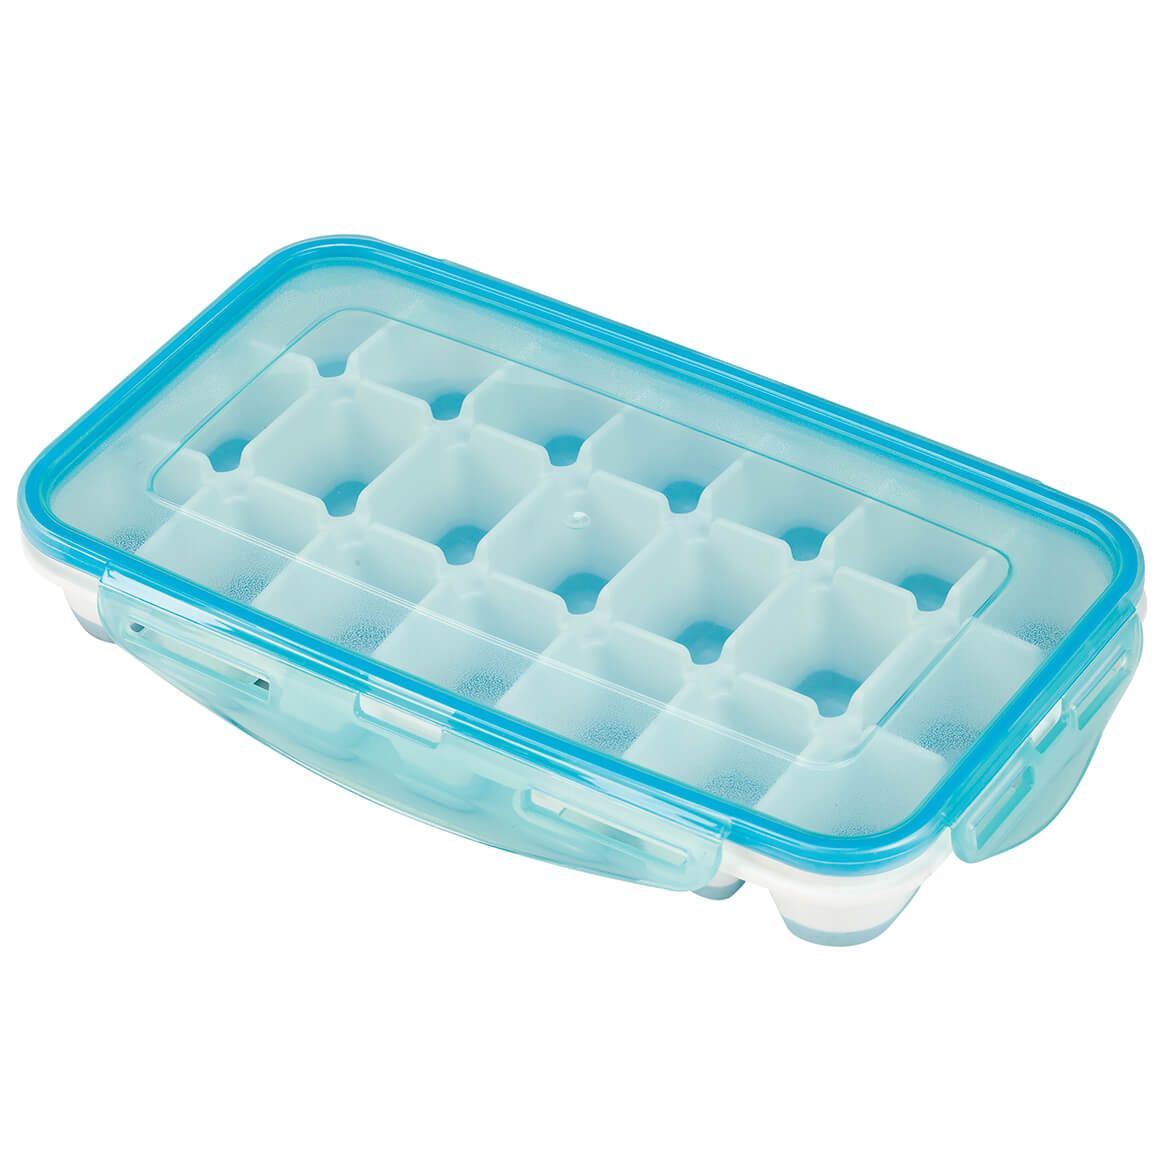 Covered Ice Cube Tray + '-' + 375790